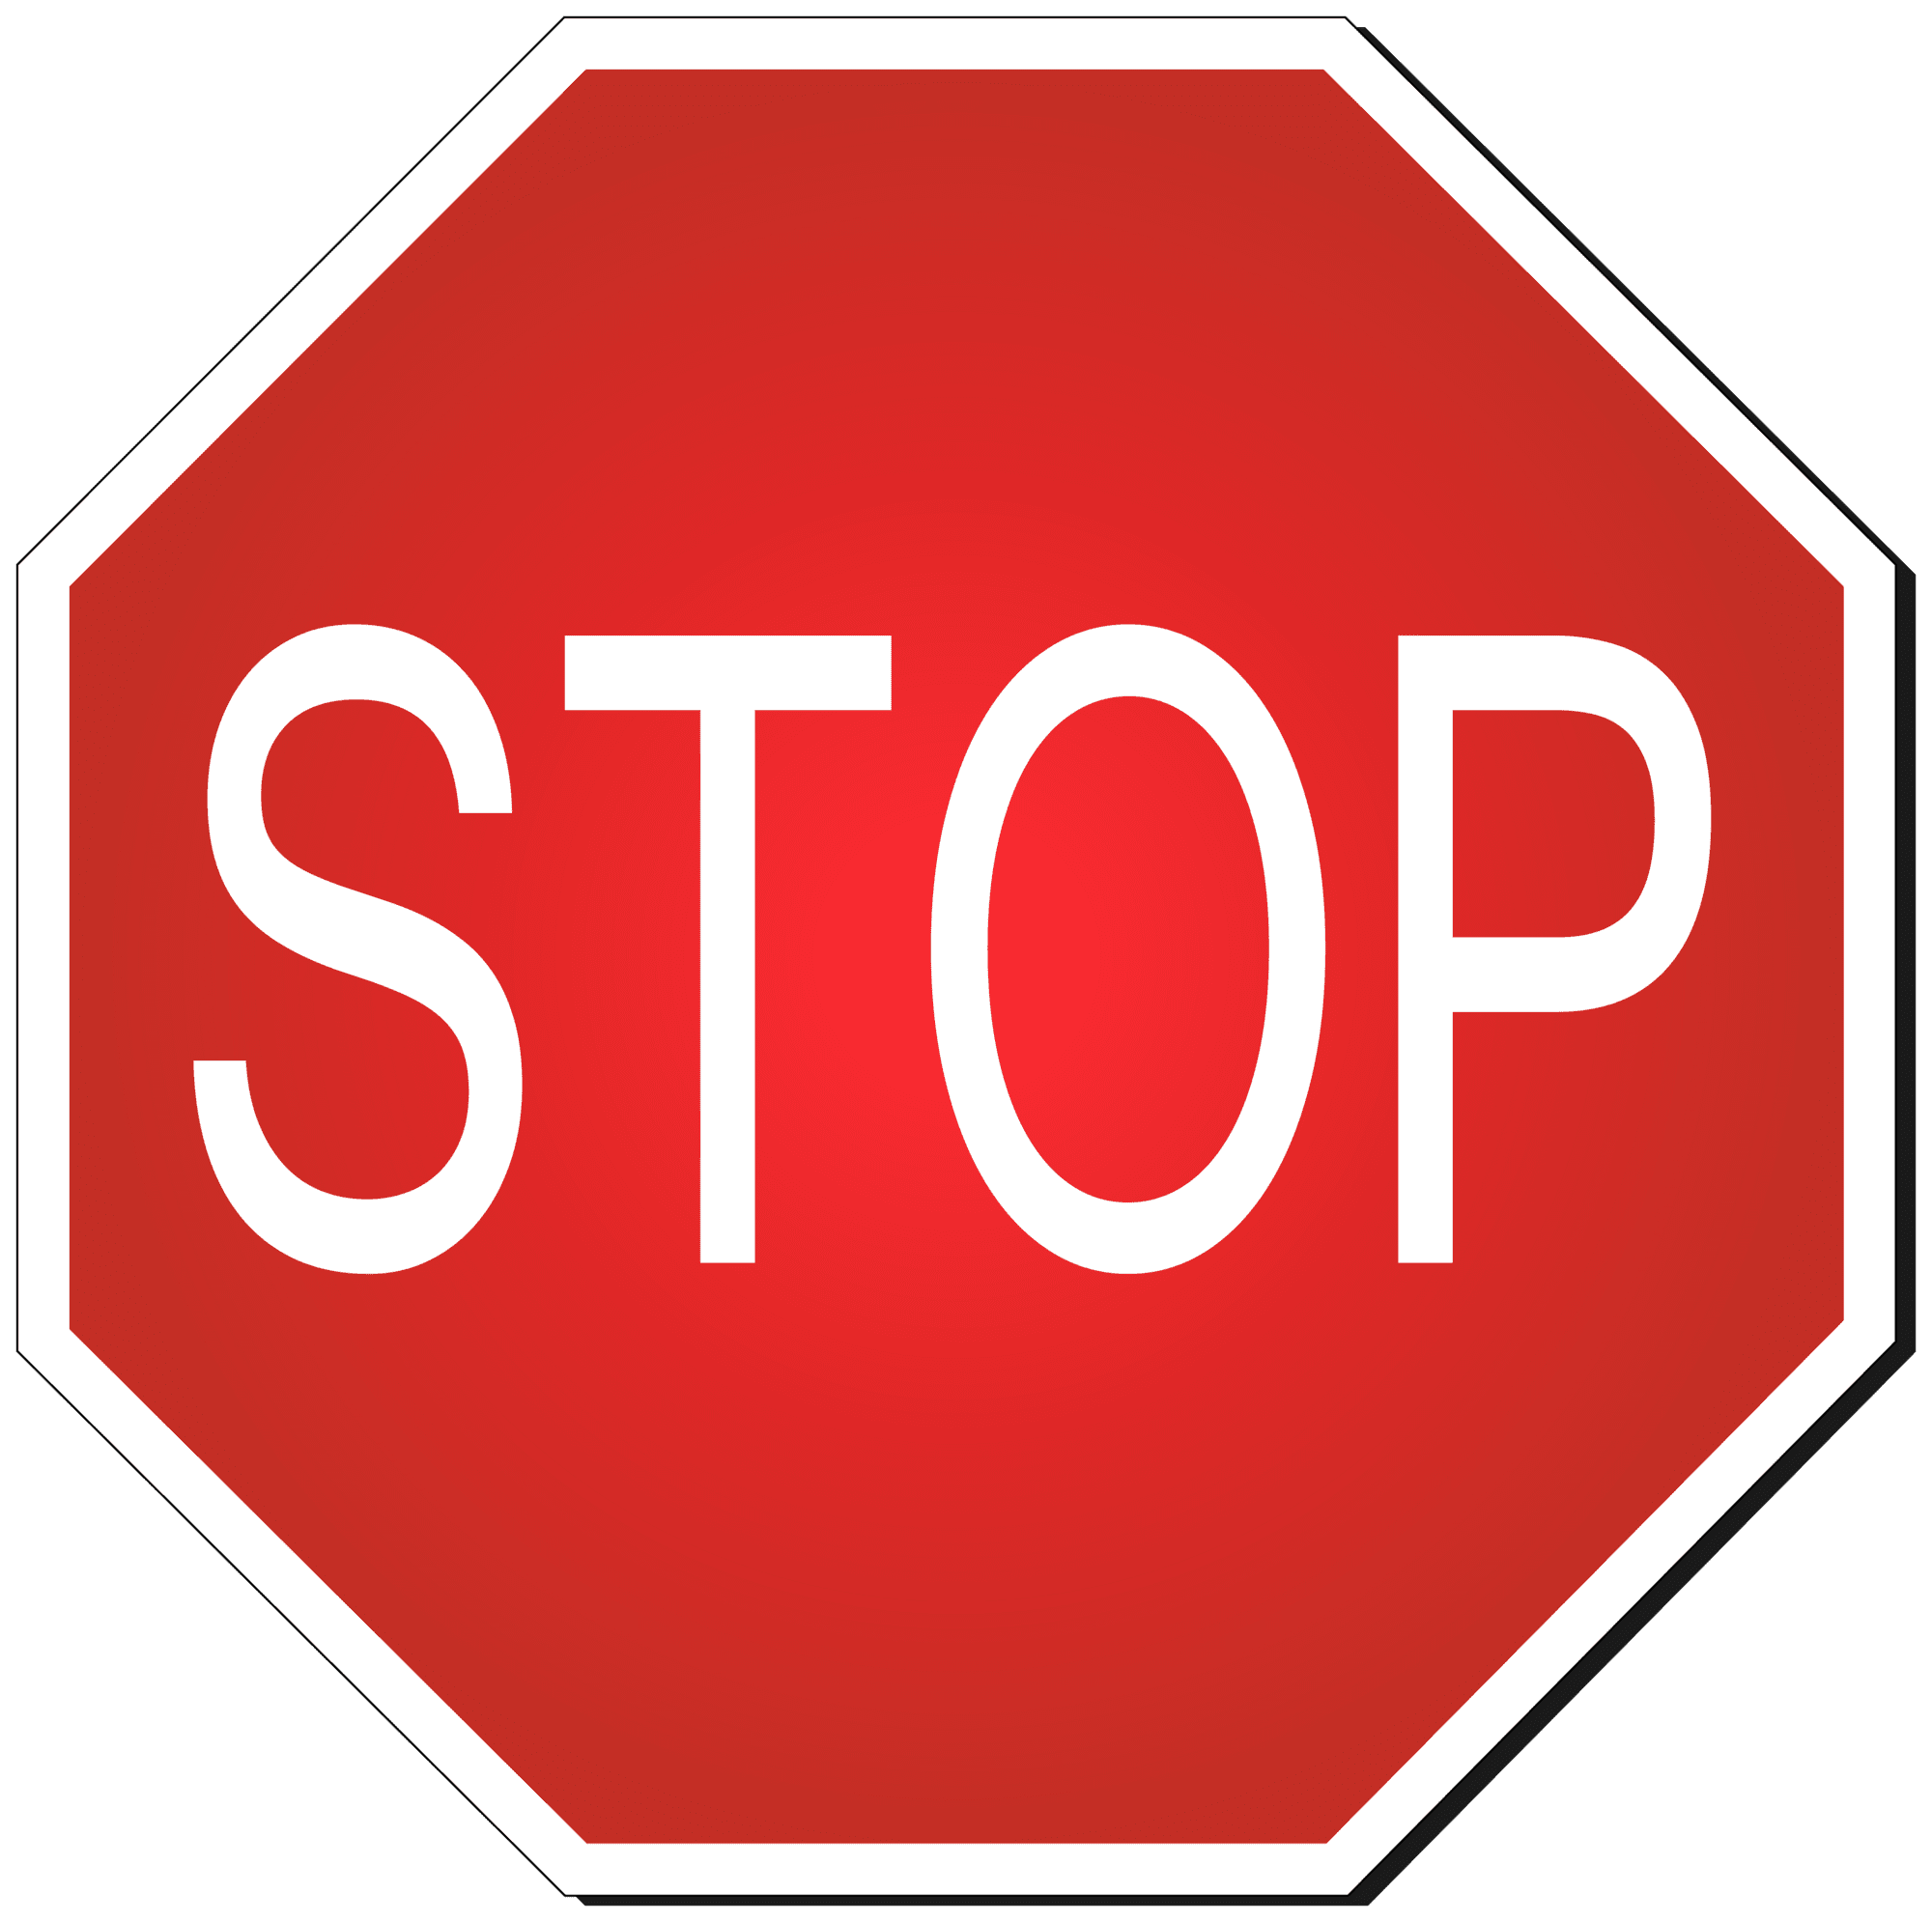 Stop signal road sign clipart best picture